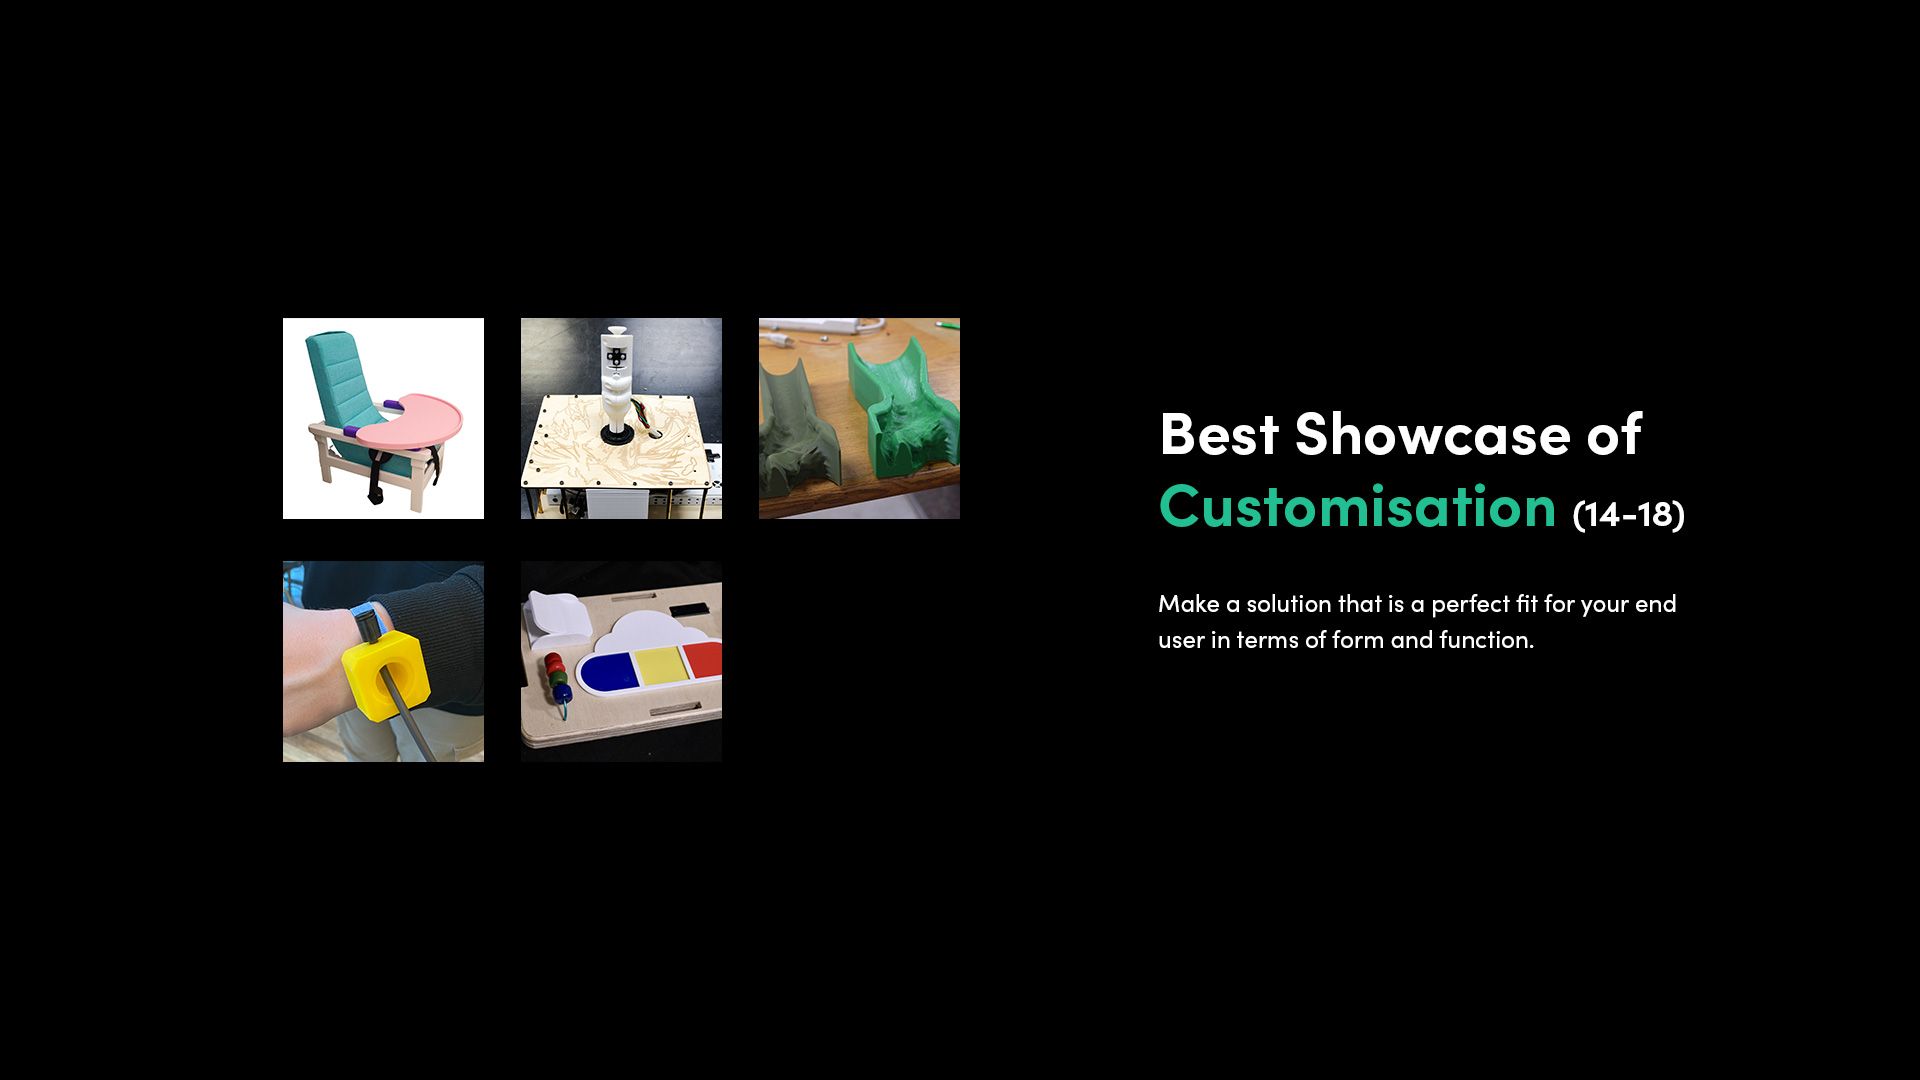 A selection of 3D printed assistive devices that made the finalist shortlist for the Make:able Challenge, in the category 'Best Showcase of Customisation - 14-18'.